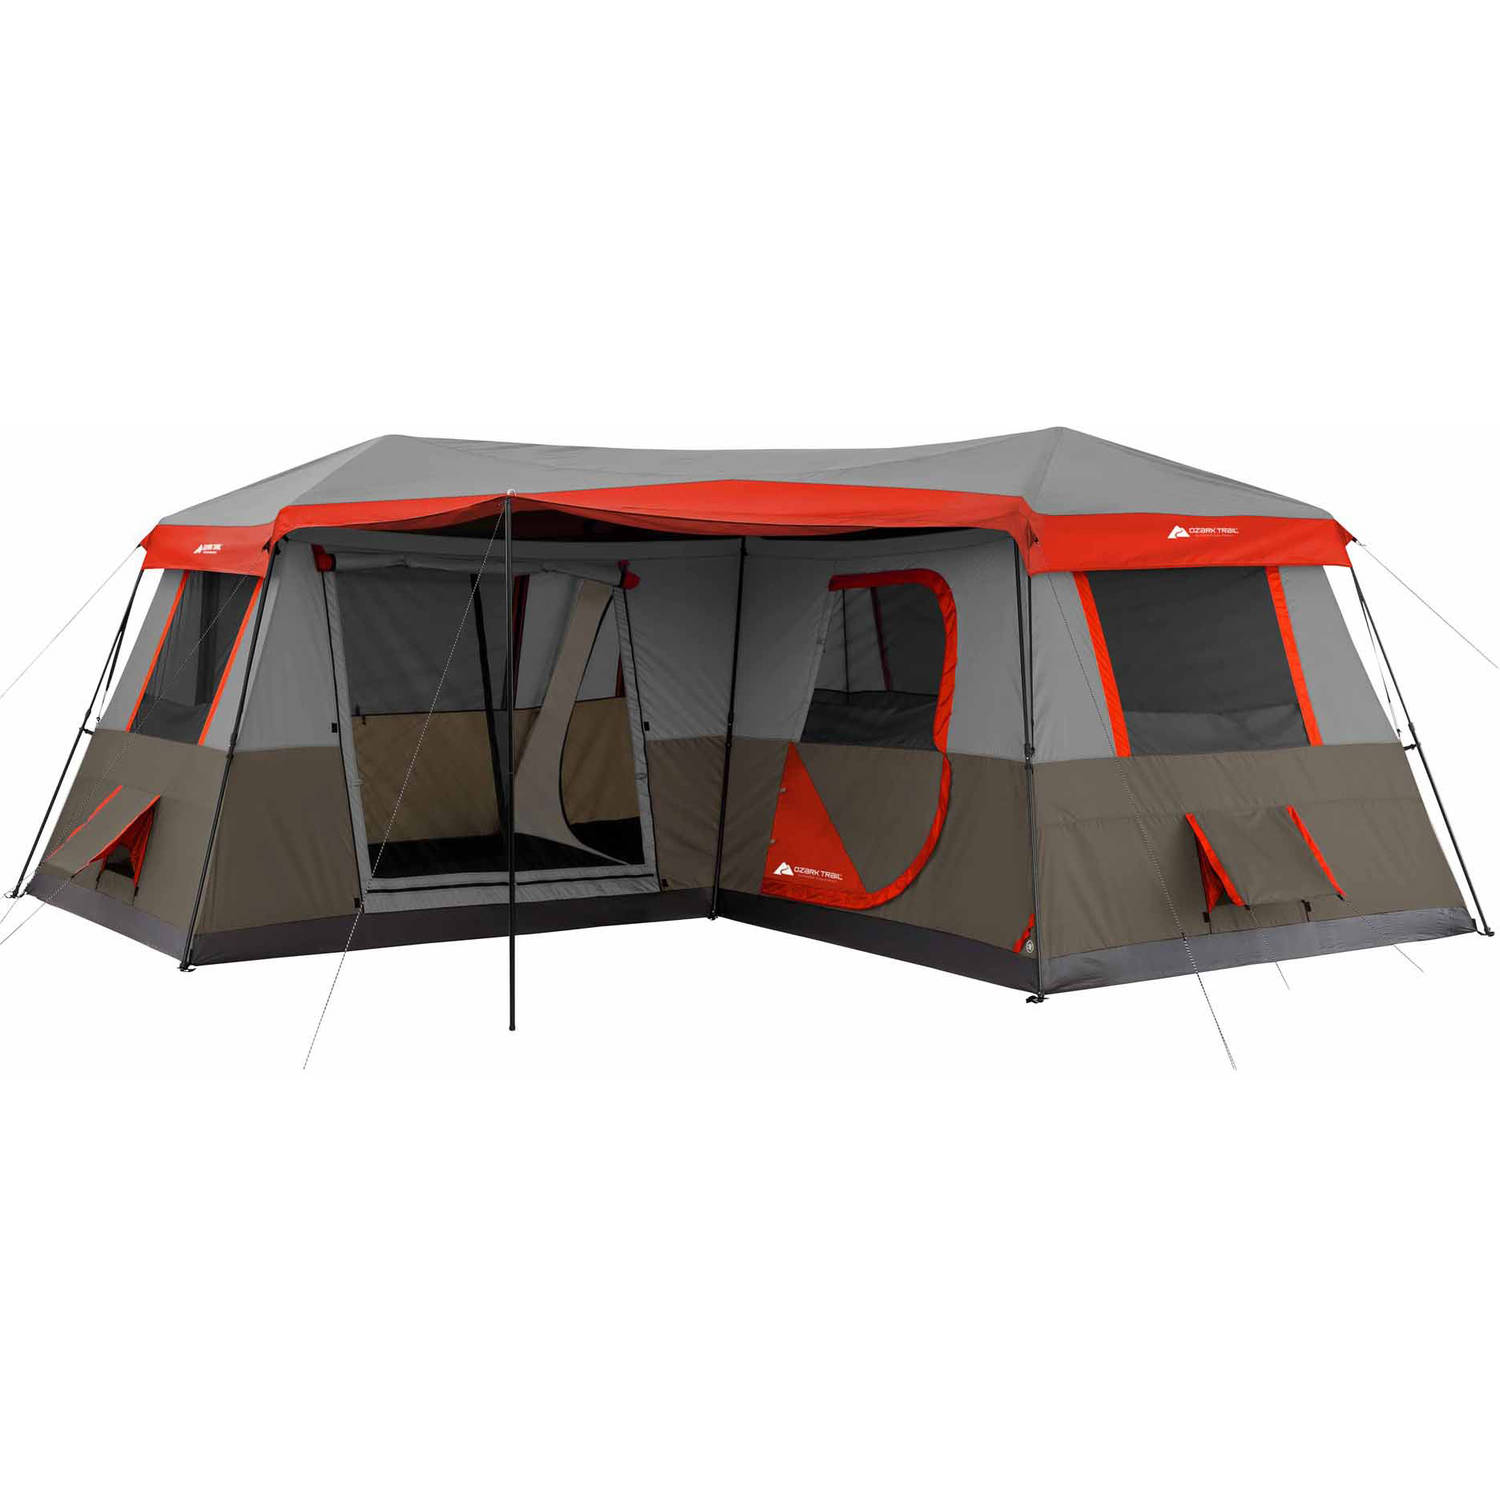 Ozark Trail 12 Person Cabin Tent Outdoor Camping Hiking Sleep System